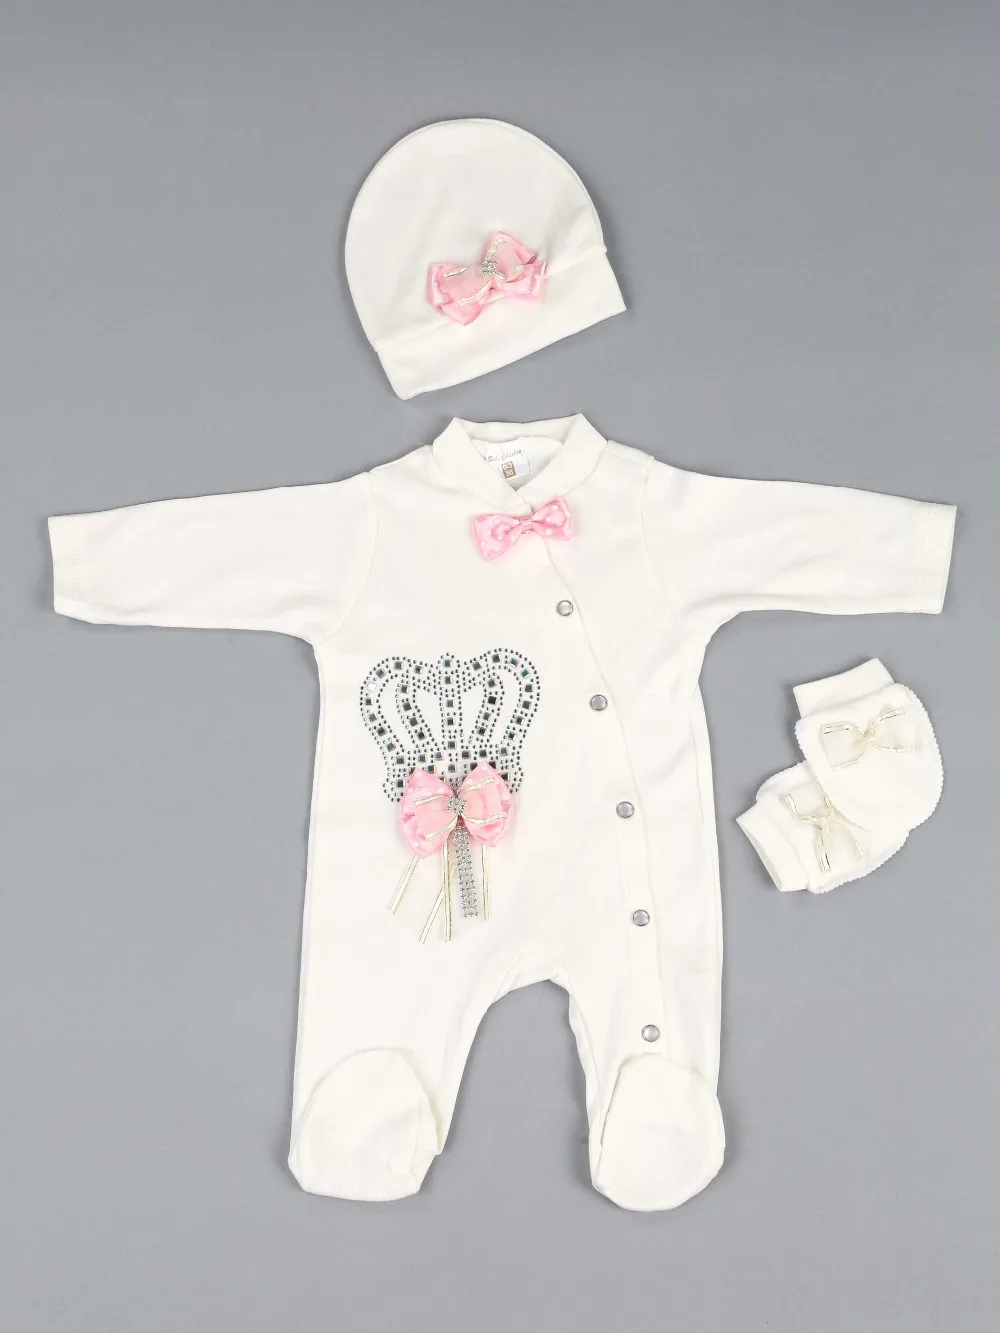 Baby rompers girls boys newborn clothes 3 pcs set cotton soft antiallergic fabric for newborn babies of kinds clothing